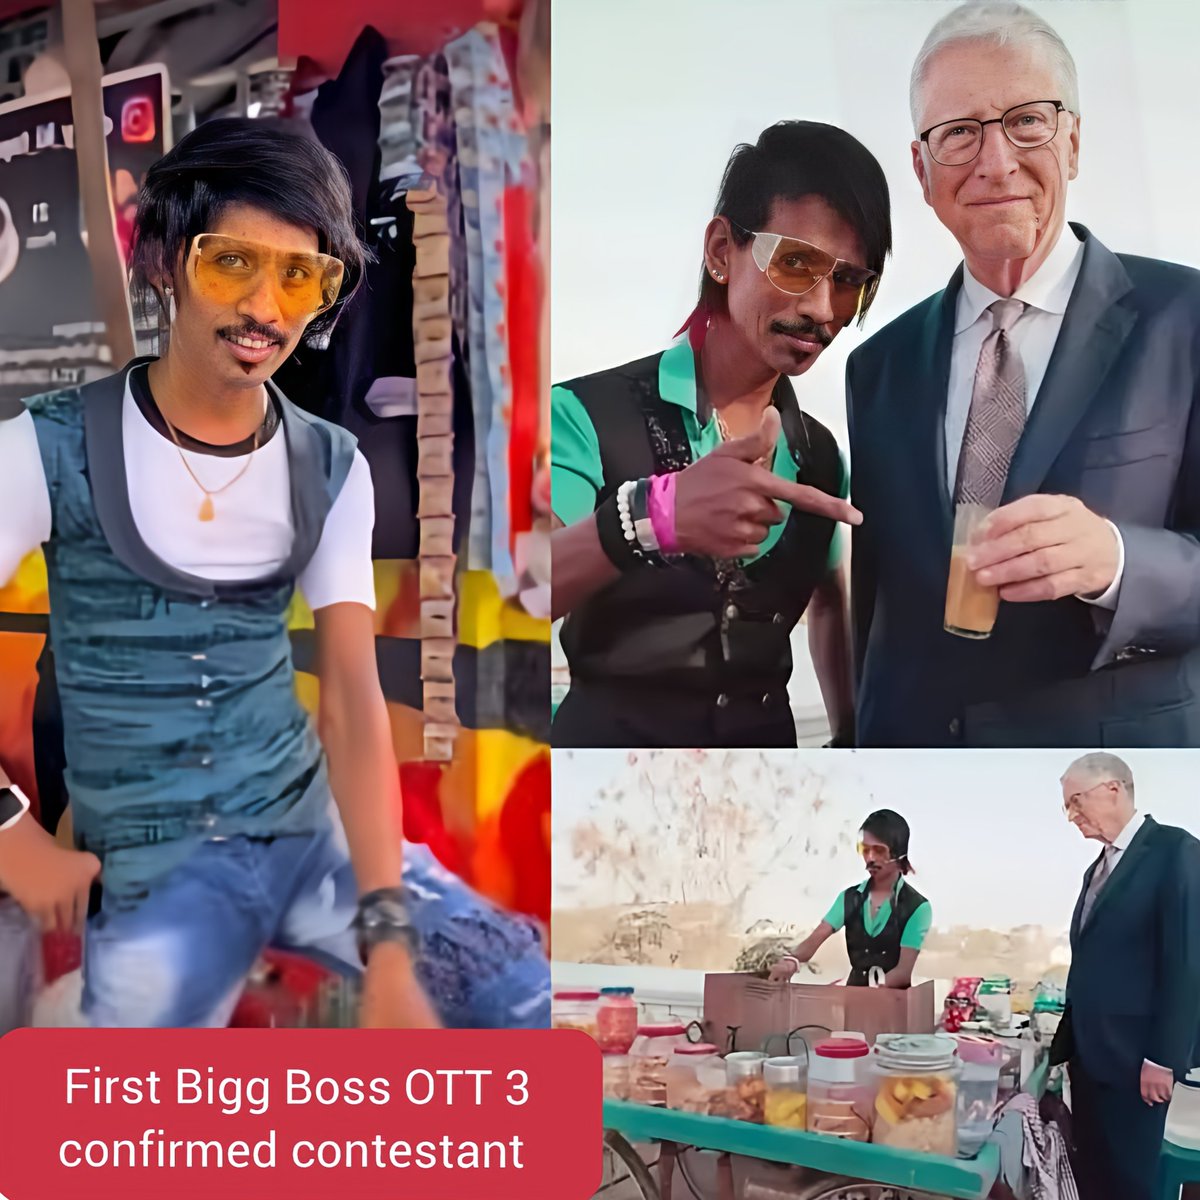 According to Media Reports Dolly Chaiwala is the first confirmed contestant of Bigg Boss OTT3 #Biggbossott #dollychaiwalla